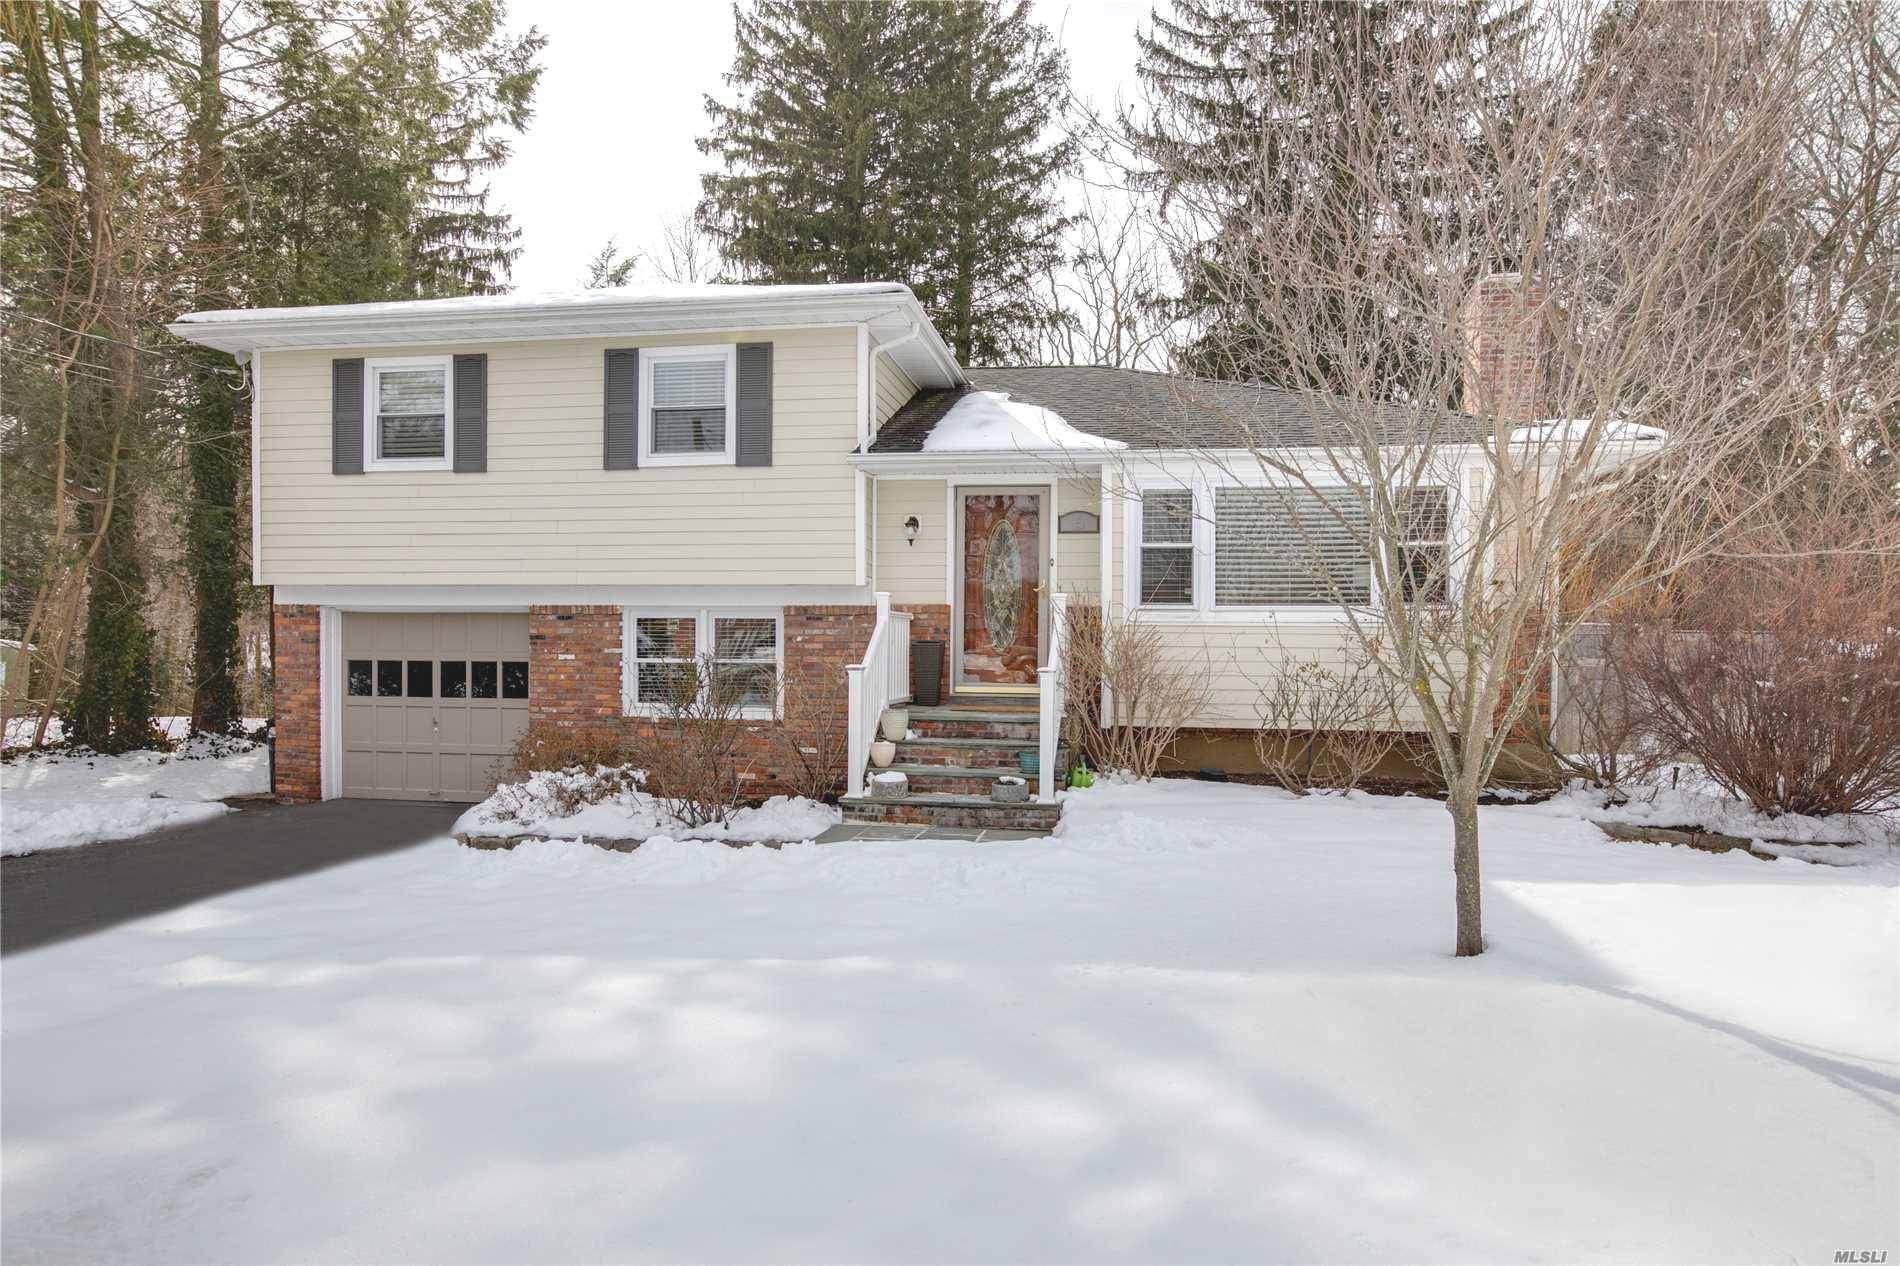 LOCATION and MINT ! This fabulous Split level home with spacious Open Floor Plan, Recently Renovated from head to toe.